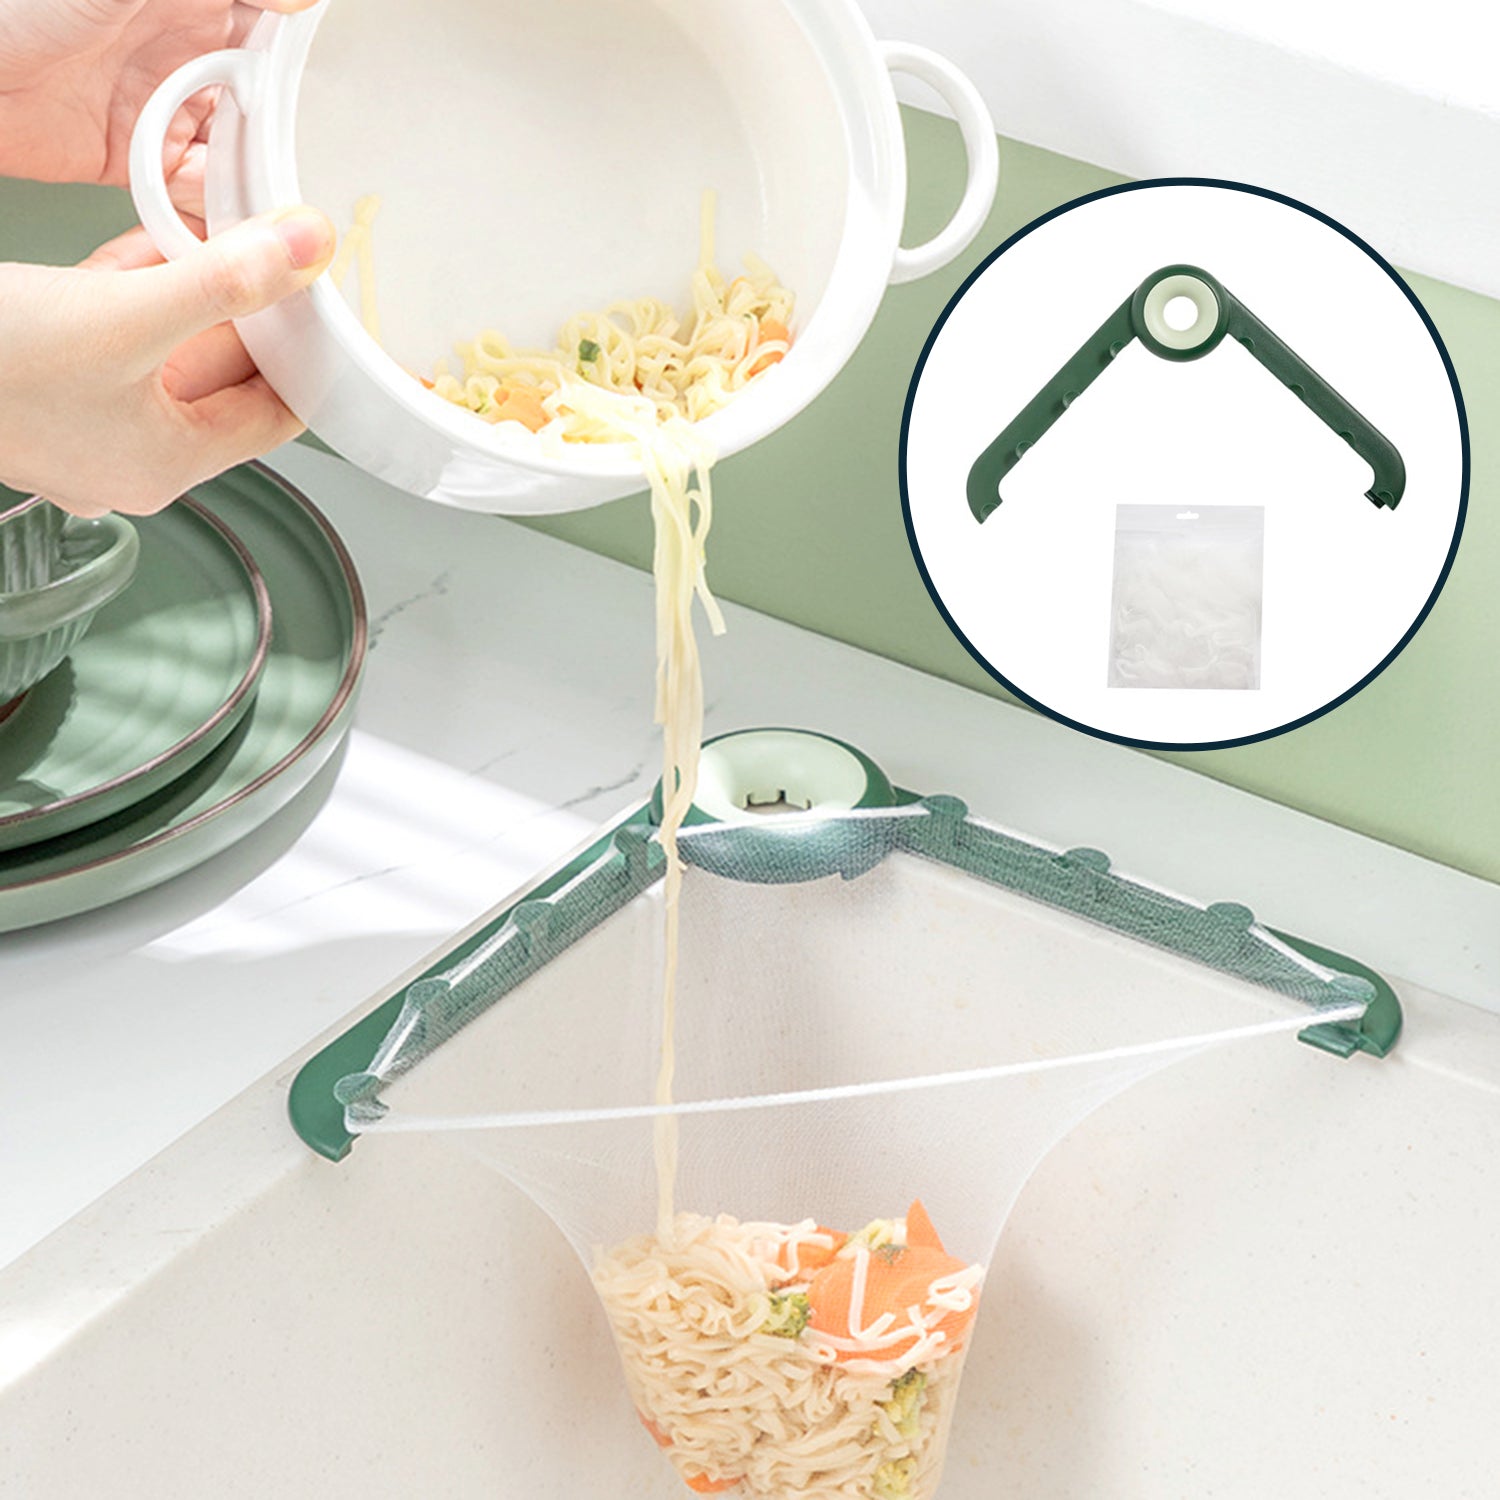 7686 Kitchen Sink Drain Filter Holder Triangle Foldable Sink Strainer Drainer For Kitchen Use (Bag not Included) DeoDap